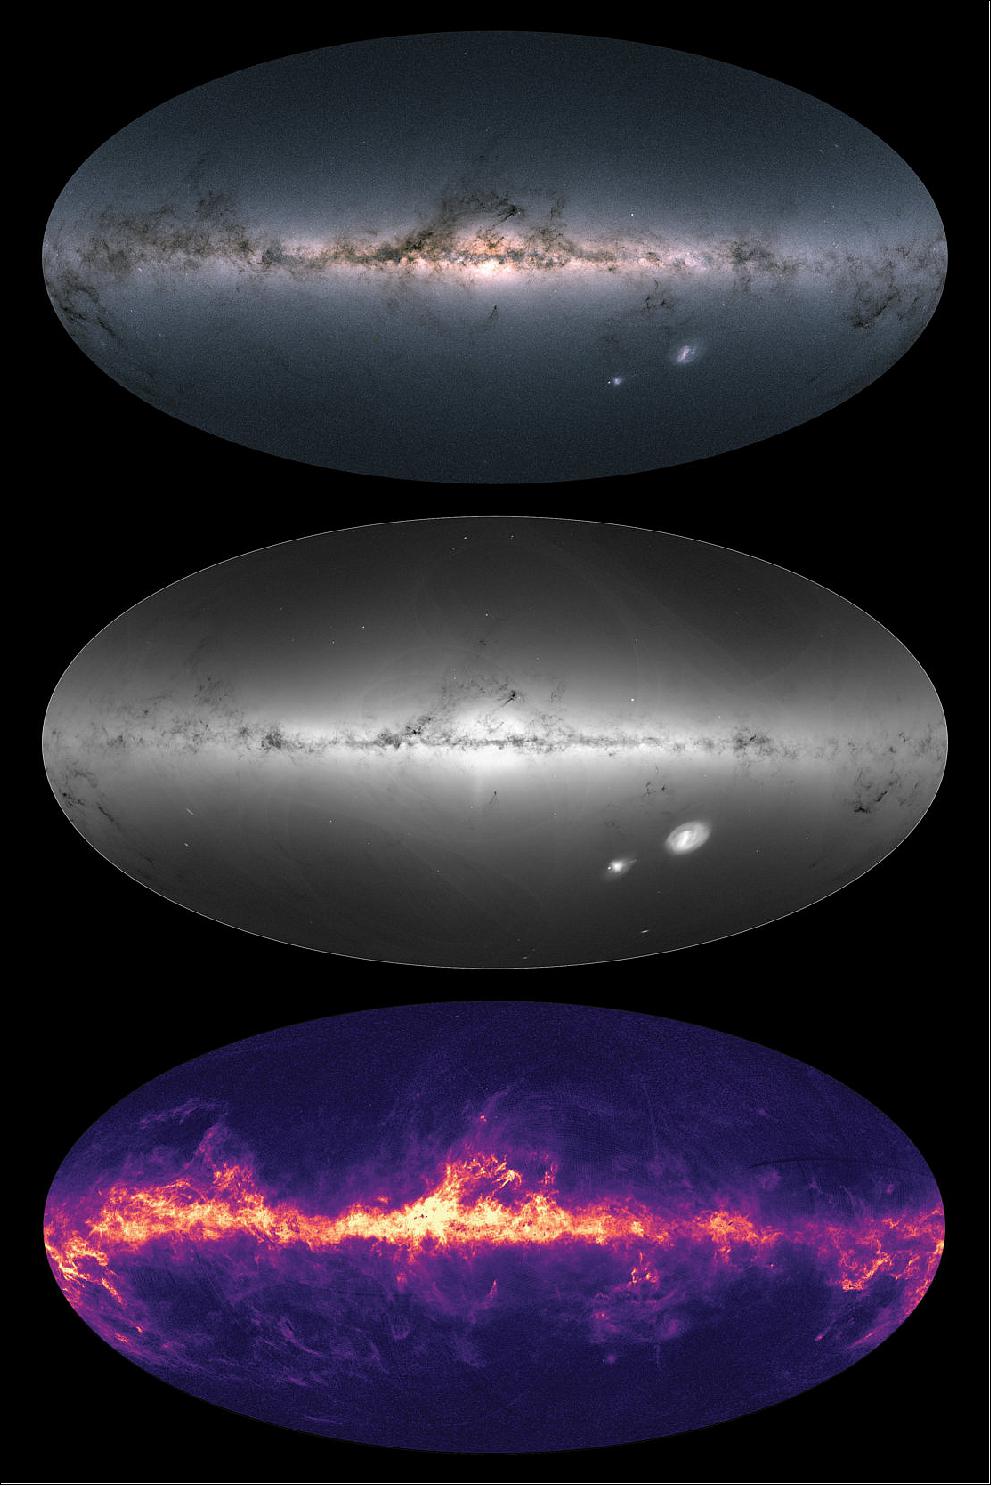 Figure 45: Gaia's all-sky view of our Milky Way Galaxy and neighboring galaxies. The maps show the total brightness and color of stars (top), the total density of stars (middle) and the interstellar dust that fills the Galaxy (bottom). These images are based on observations performed by the ESA satellite in each portion of the sky between July 2014 and May 2016, which were published as part of Gaia second data release on 25 April 2018 (image credit:ESA/Gaia/DPAC). 45) Acknowledgement: Gaia Data Processing and Analysis Consortium (DPAC); Top and middle: A. Moitinho / A. F. Silva / M. Barros / C. Barata, University of Lisbon, Portugal; H. Savietto, Fork Research, Portugal;Bottom: Gaia Coordination Unit 8; M. Fouesneau / C. Bailer-Jones, Max Planck Institute for Astronomy, Heidelberg, Germany.